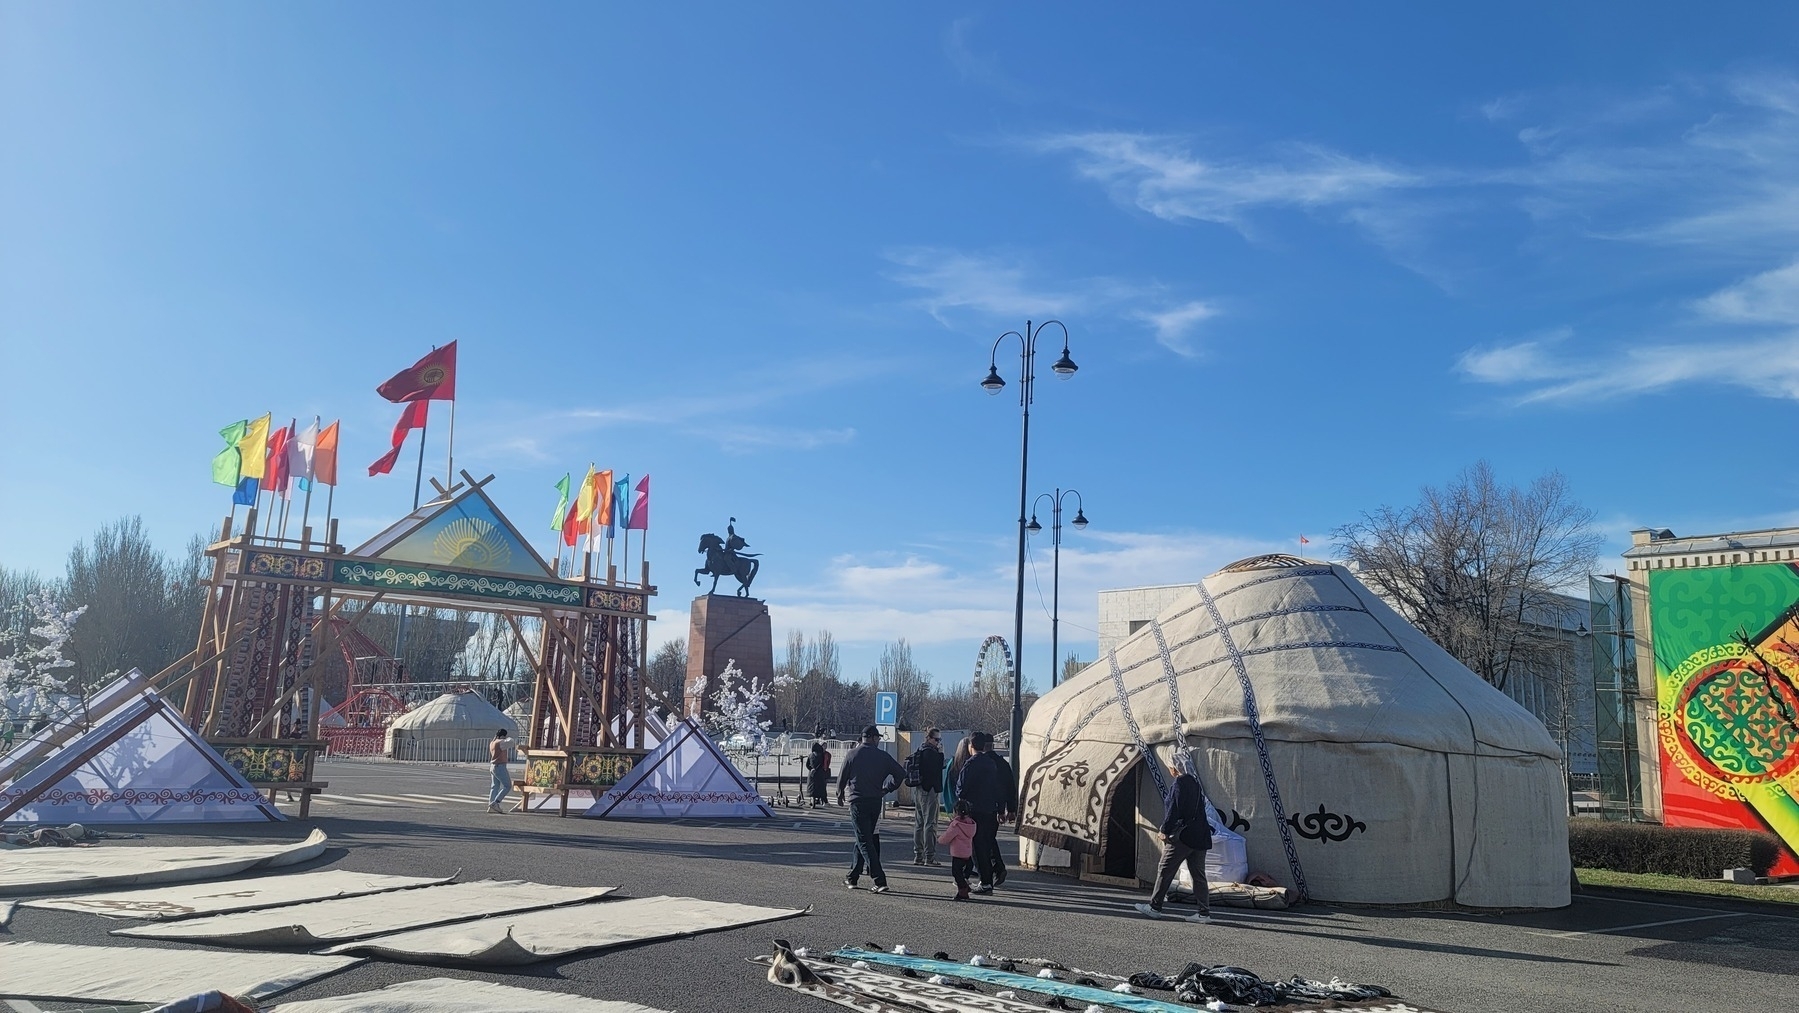 a few yurts and decorations set up by the iconic Manas statue at Ala-Too Square